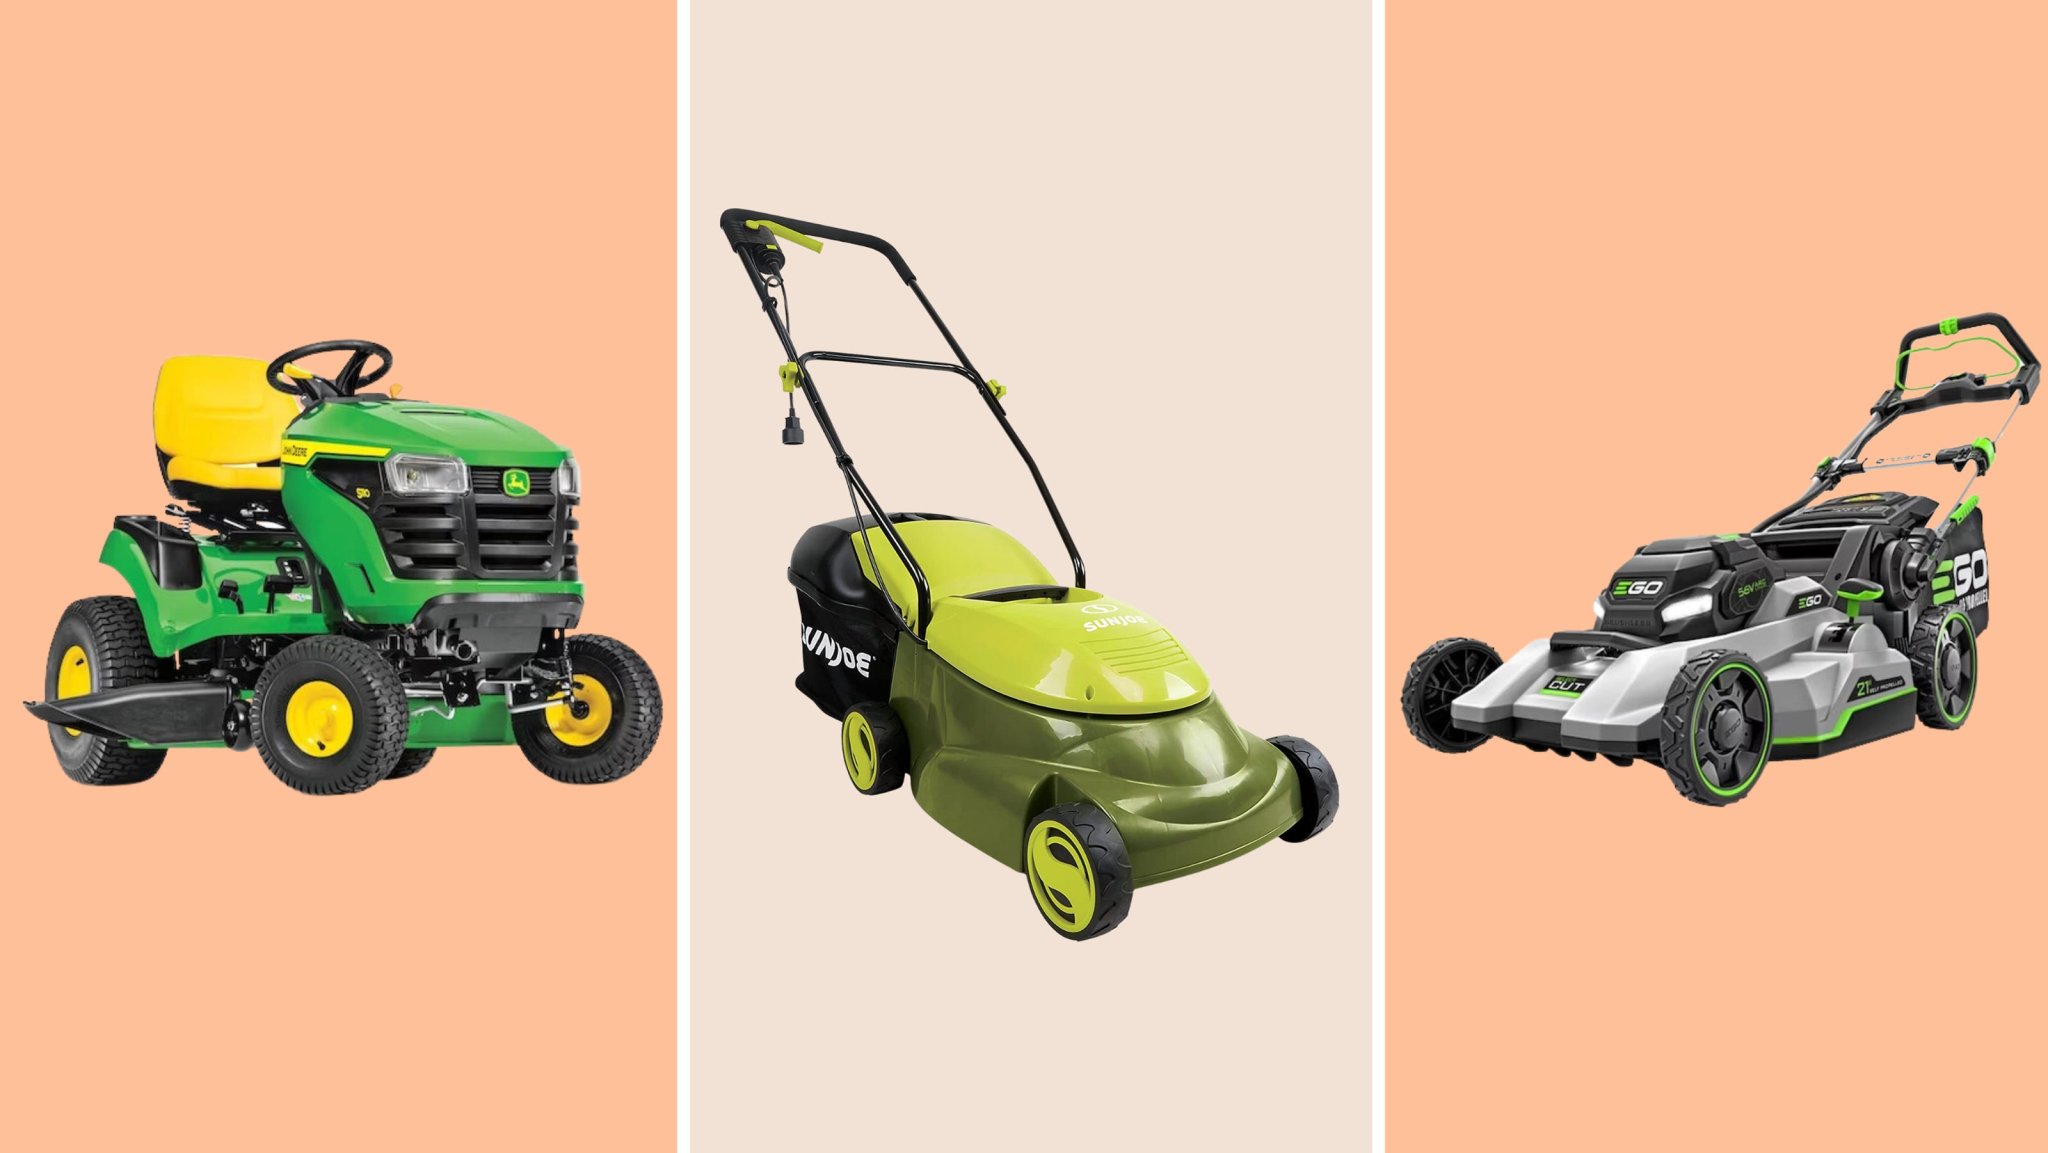 Keep your yard neat with the 10 best lawn mower deals at Amazon, Lowe's and Home Depot